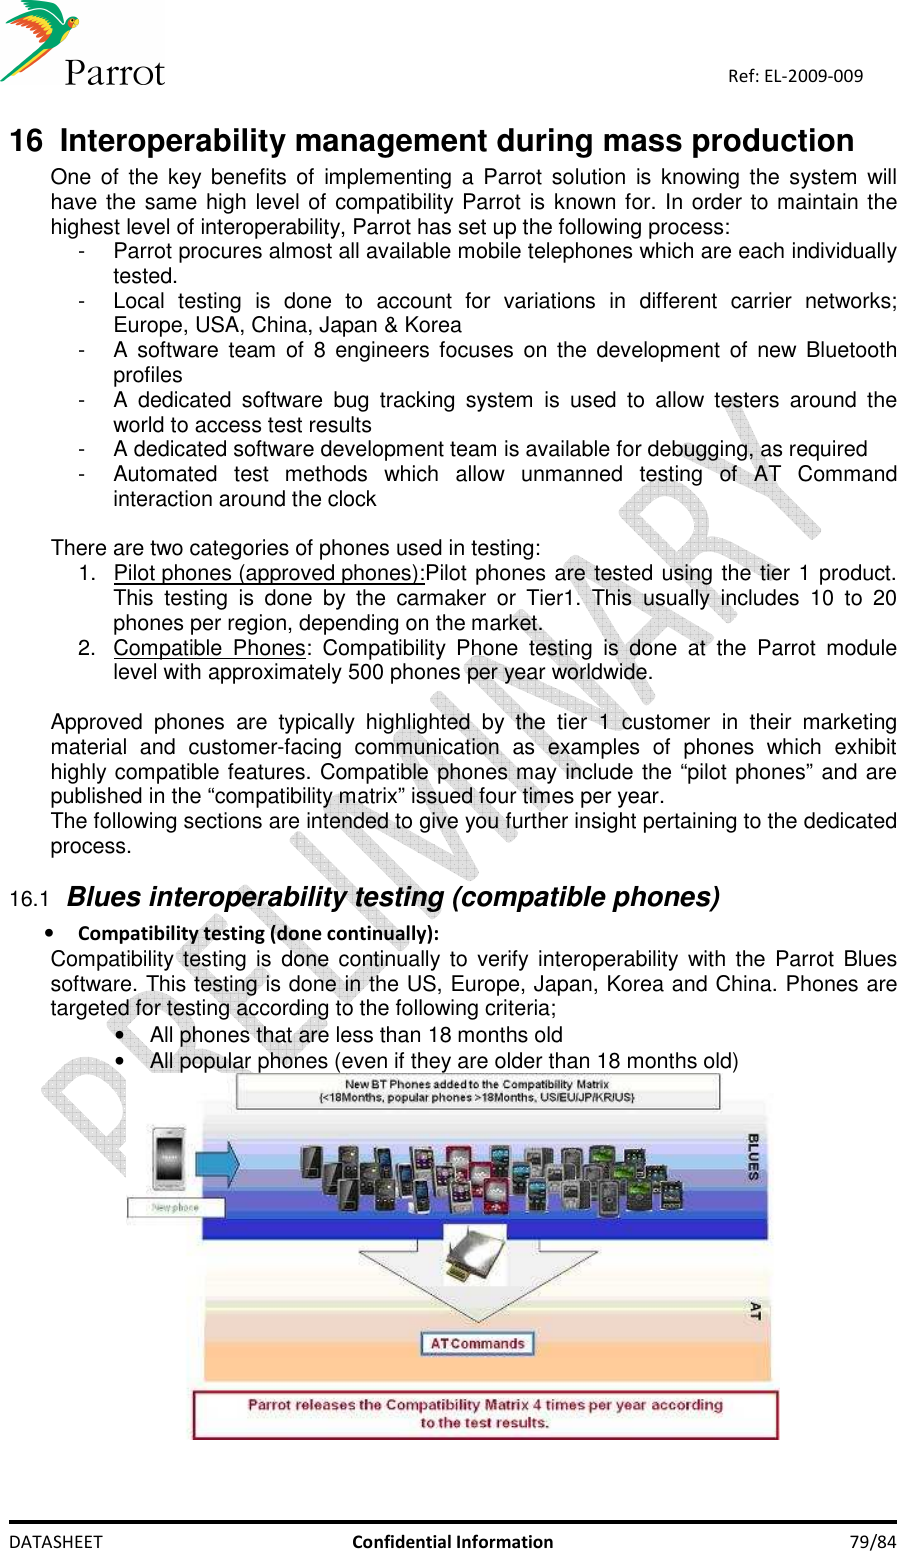    DATASHEET  Confidential Information  79/84 Ref: EL-2009-009 16  Interoperability management during mass production One of  the key benefits  of  implementing  a Parrot  solution  is  knowing the  system  will have the same high level of compatibility Parrot is known for. In order to maintain the highest level of interoperability, Parrot has set up the following process: -  Parrot procures almost all available mobile telephones which are each individually tested. -  Local  testing  is  done  to  account  for  variations  in  different  carrier  networks; Europe, USA, China, Japan &amp; Korea -  A software  team  of  8  engineers focuses  on the development  of new Bluetooth profiles -  A  dedicated  software  bug  tracking  system  is  used  to  allow  testers  around  the world to access test results -  A dedicated software development team is available for debugging, as required -  Automated  test  methods  which  allow  unmanned  testing  of  AT  Command interaction around the clock  There are two categories of phones used in testing: 1.  Pilot phones (approved phones): Pilot phones are tested using the tier 1 product. This  testing  is  done  by  the  carmaker  or  Tier1.  This  usually  includes  10  to  20 phones per region, depending on the market. 2.  Compatible  Phones:  Compatibility  Phone  testing  is  done  at  the  Parrot  module level with approximately 500 phones per year worldwide.  Approved  phones  are  typically  highlighted  by  the  tier  1  customer  in  their  marketing material  and  customer-facing  communication  as  examples  of  phones  which  exhibit highly compatible features. Compatible phones may include the “pilot phones” and are published in the “compatibility matrix” issued four times per year.  The following sections are intended to give you further insight pertaining to the dedicated process. 16.1 Blues interoperability testing (compatible phones) • Compatibility testing (done continually): Compatibility testing is  done continually to verify interoperability  with  the Parrot  Blues software. This testing is done in the US, Europe, Japan, Korea and China. Phones are targeted for testing according to the following criteria; •  All phones that are less than 18 months old  •  All popular phones (even if they are older than 18 months old)   